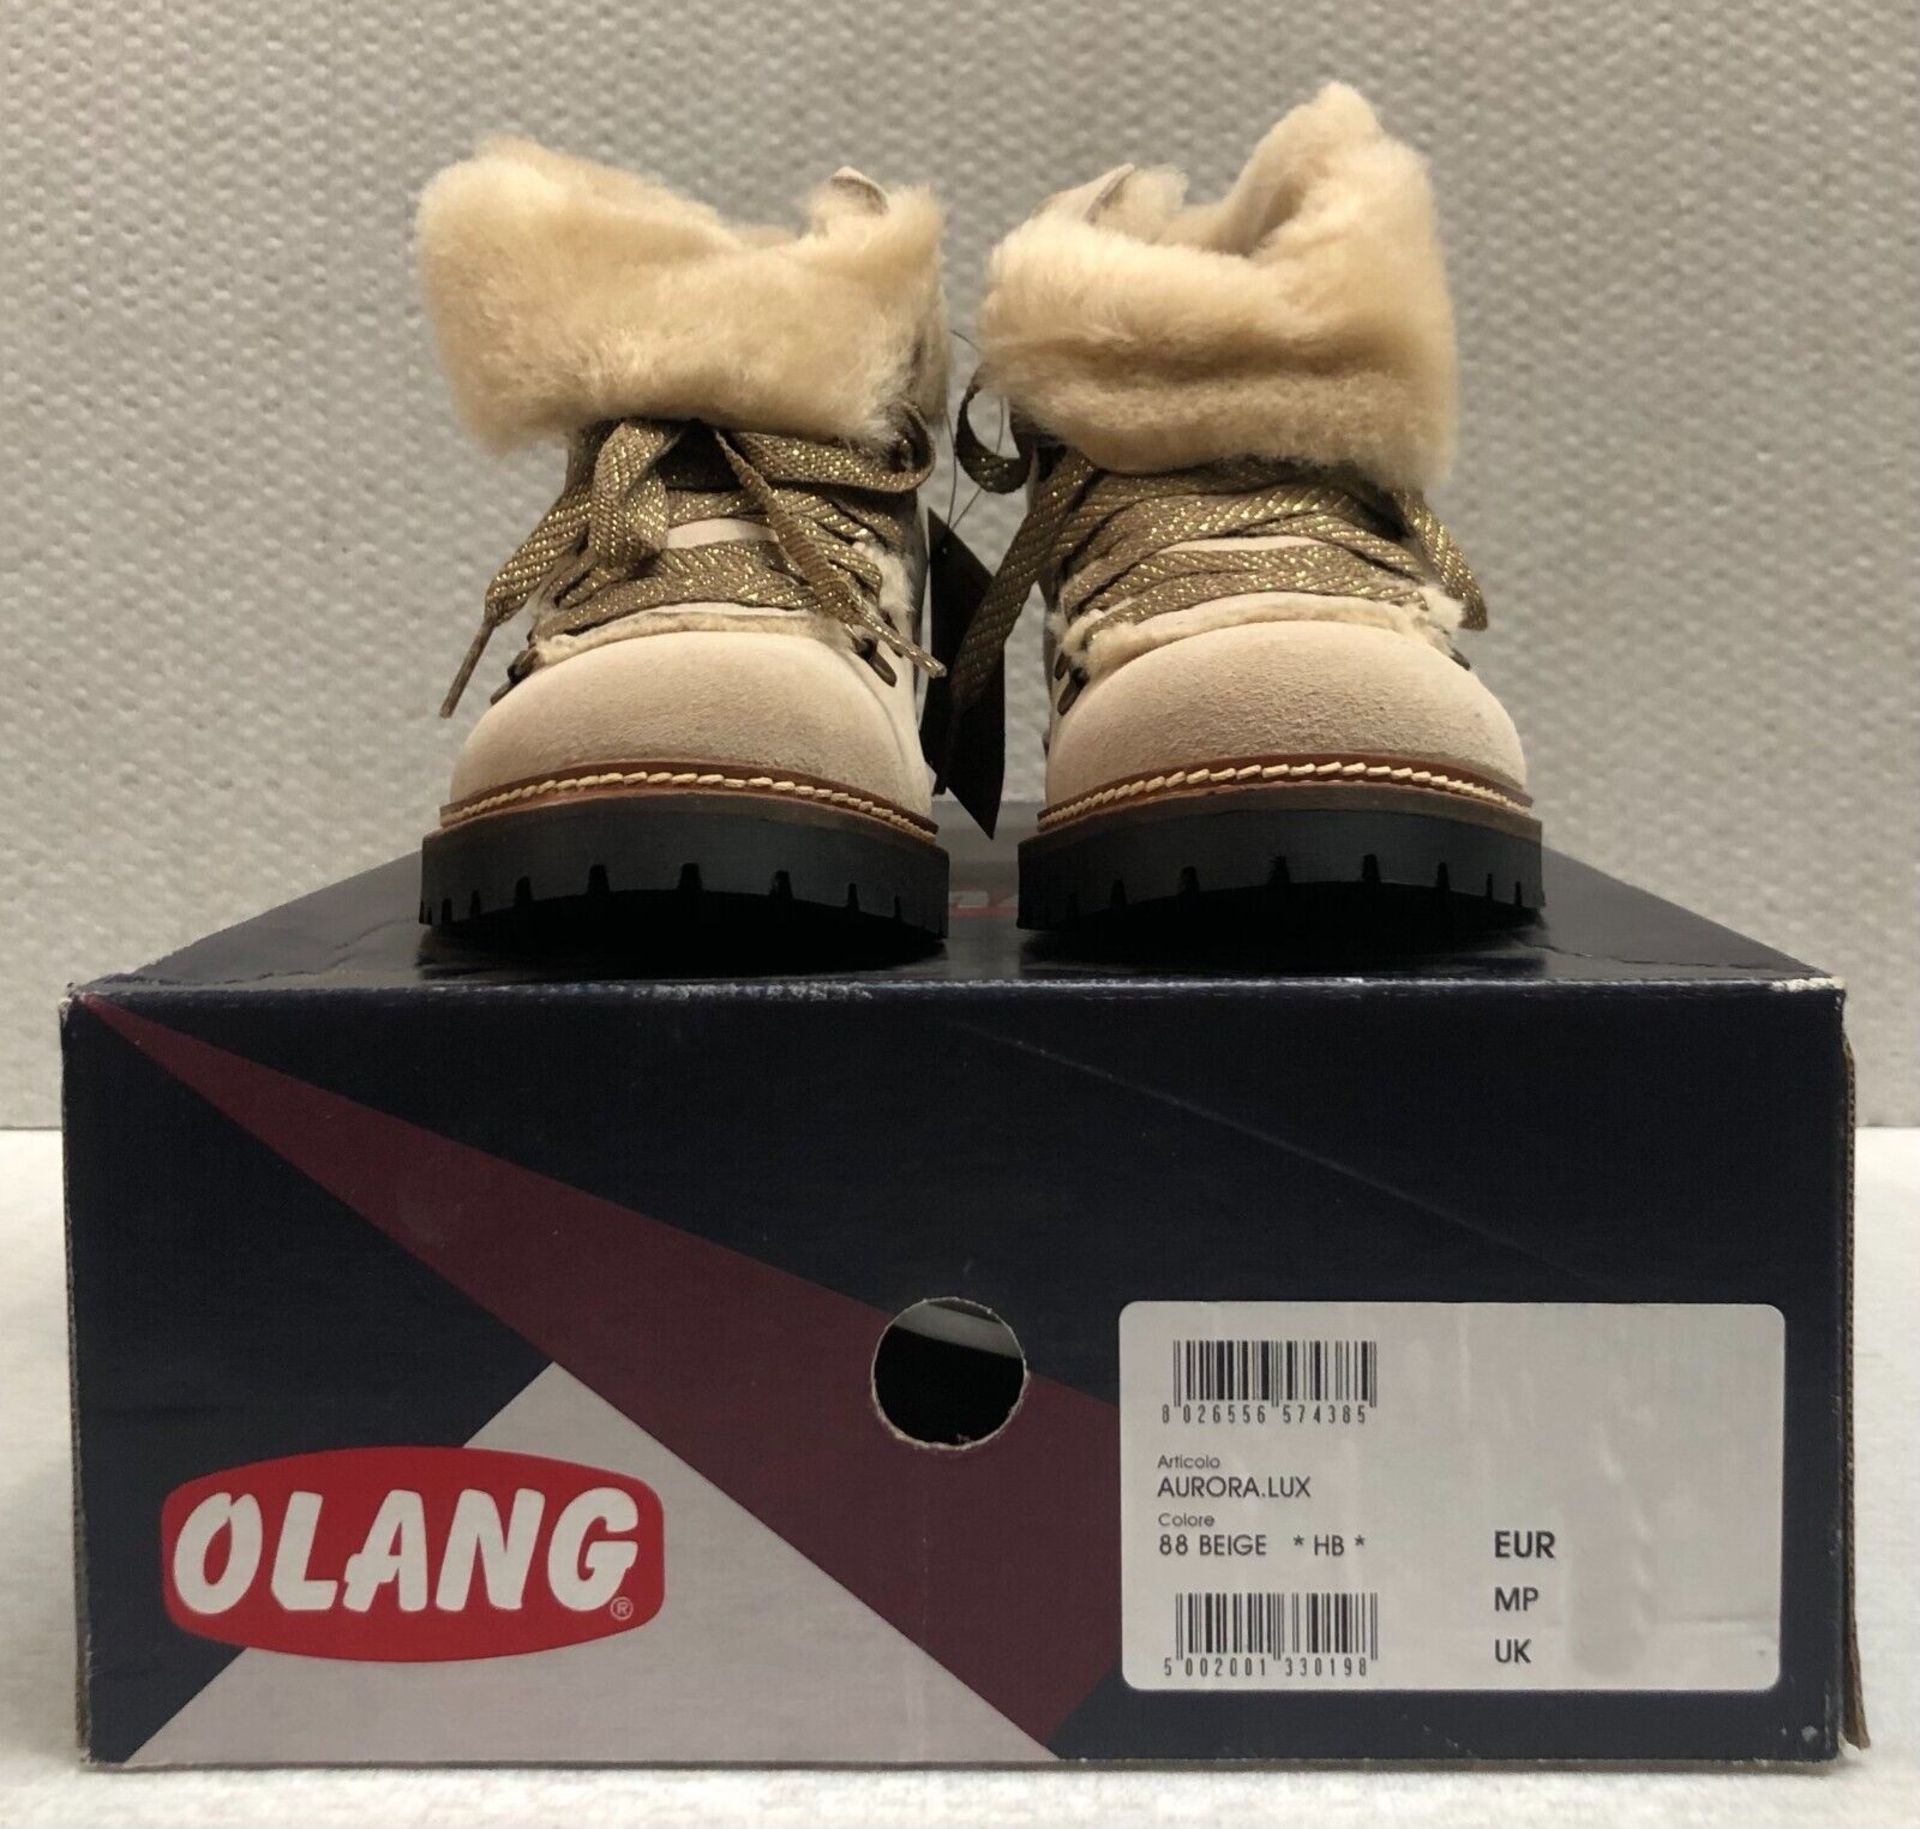 1 x Pair of Designer Olang Women's Winter Boots - Aurora.Lux 88 Beige - Euro Size 39 - New Boxed - Image 5 of 6